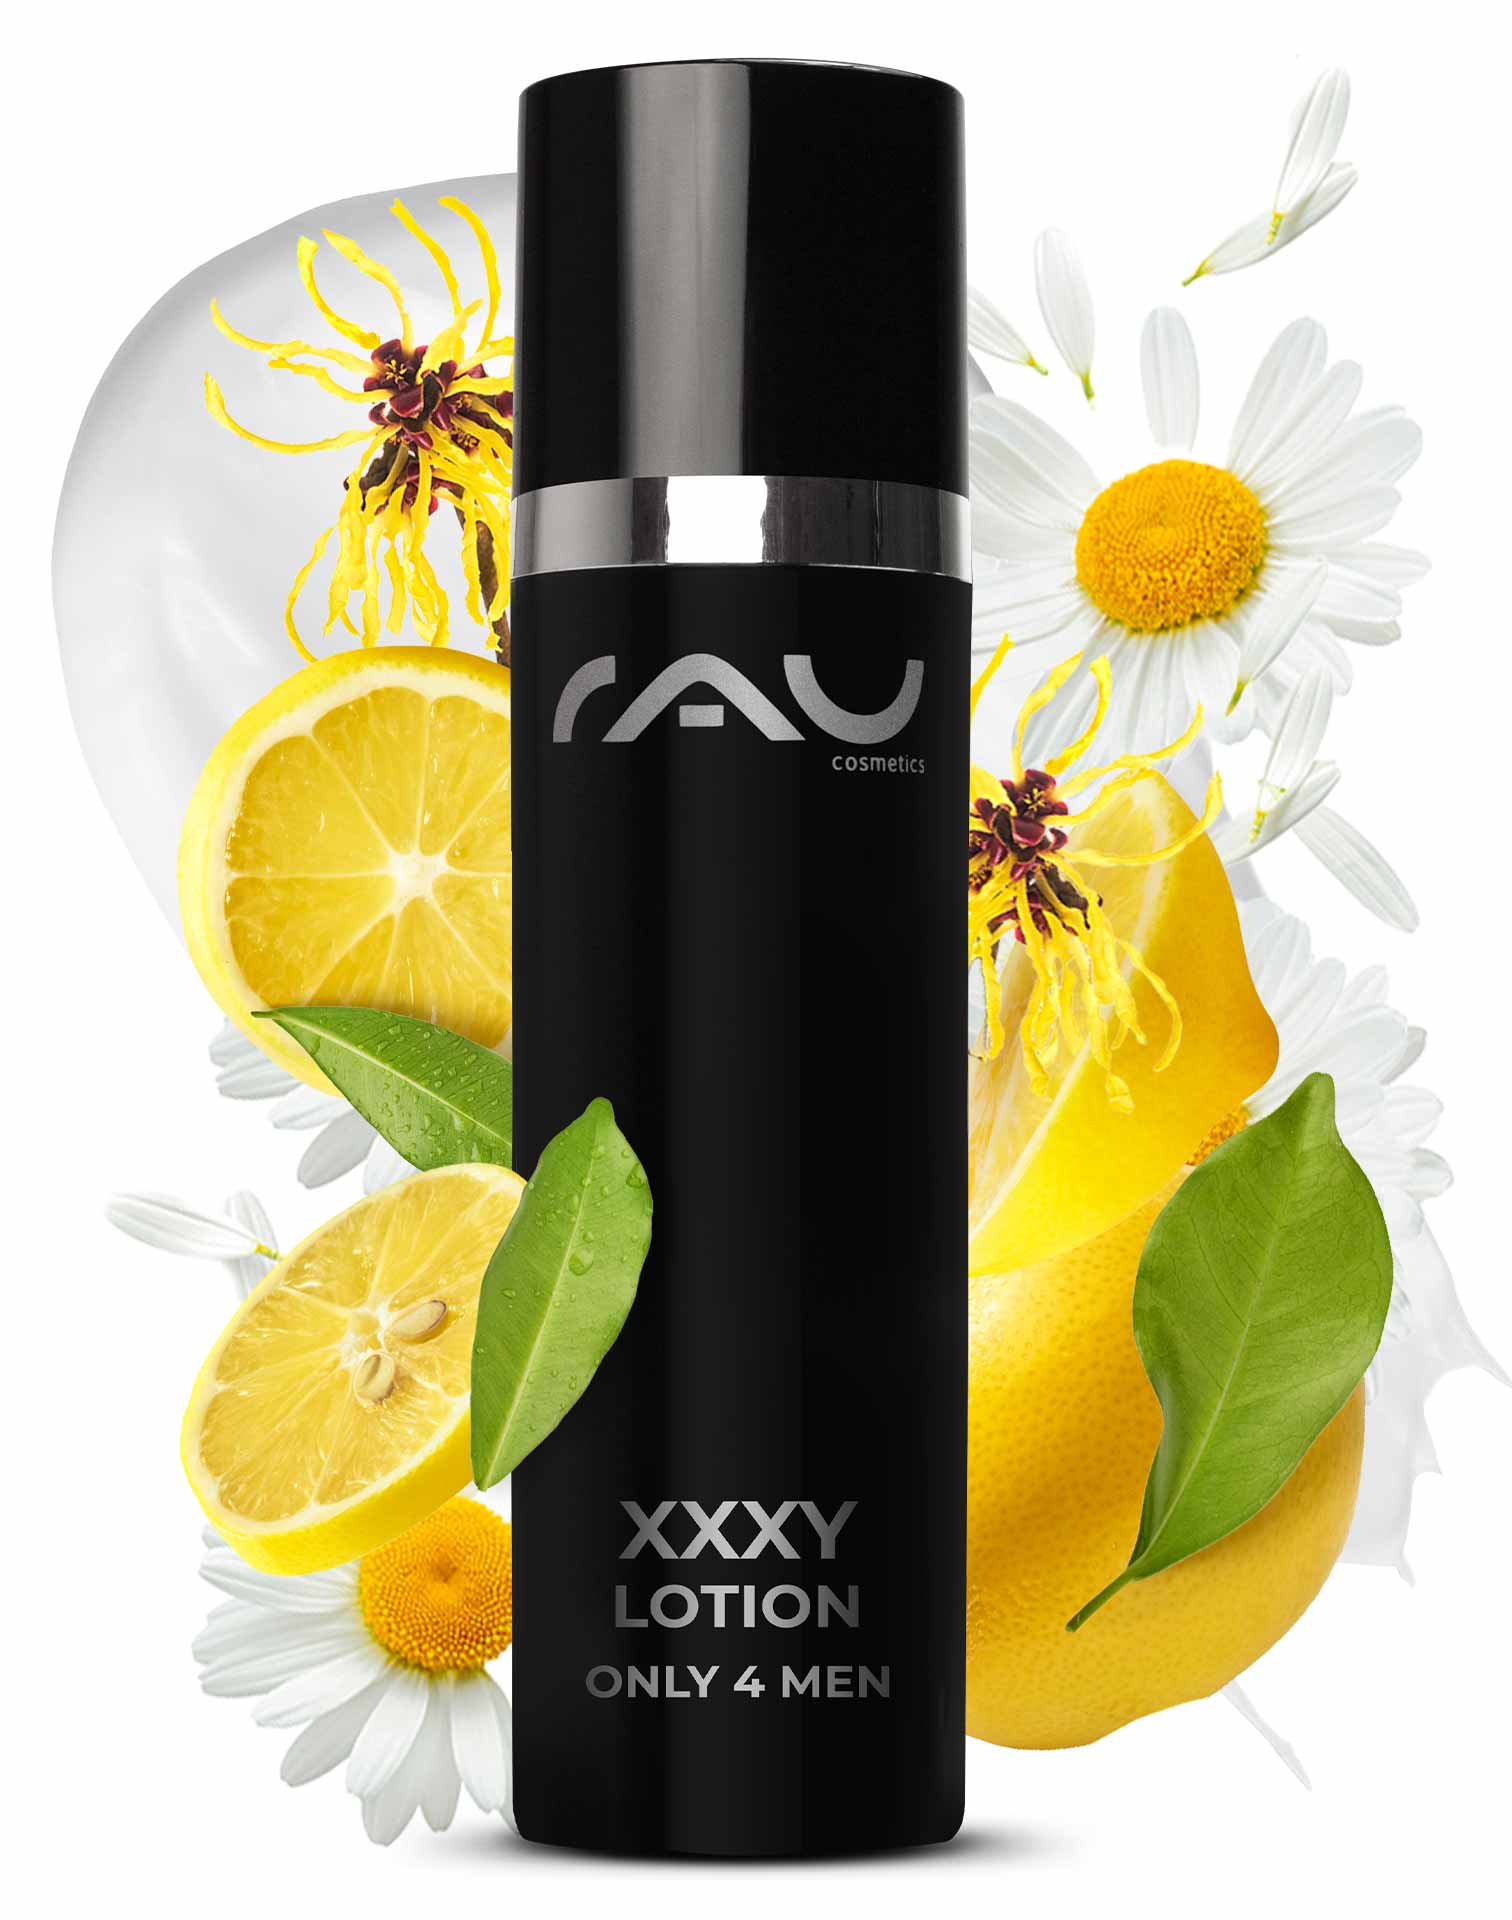 XXXY Lotion only 4 men 50 ml - Anti-Aging Day Care